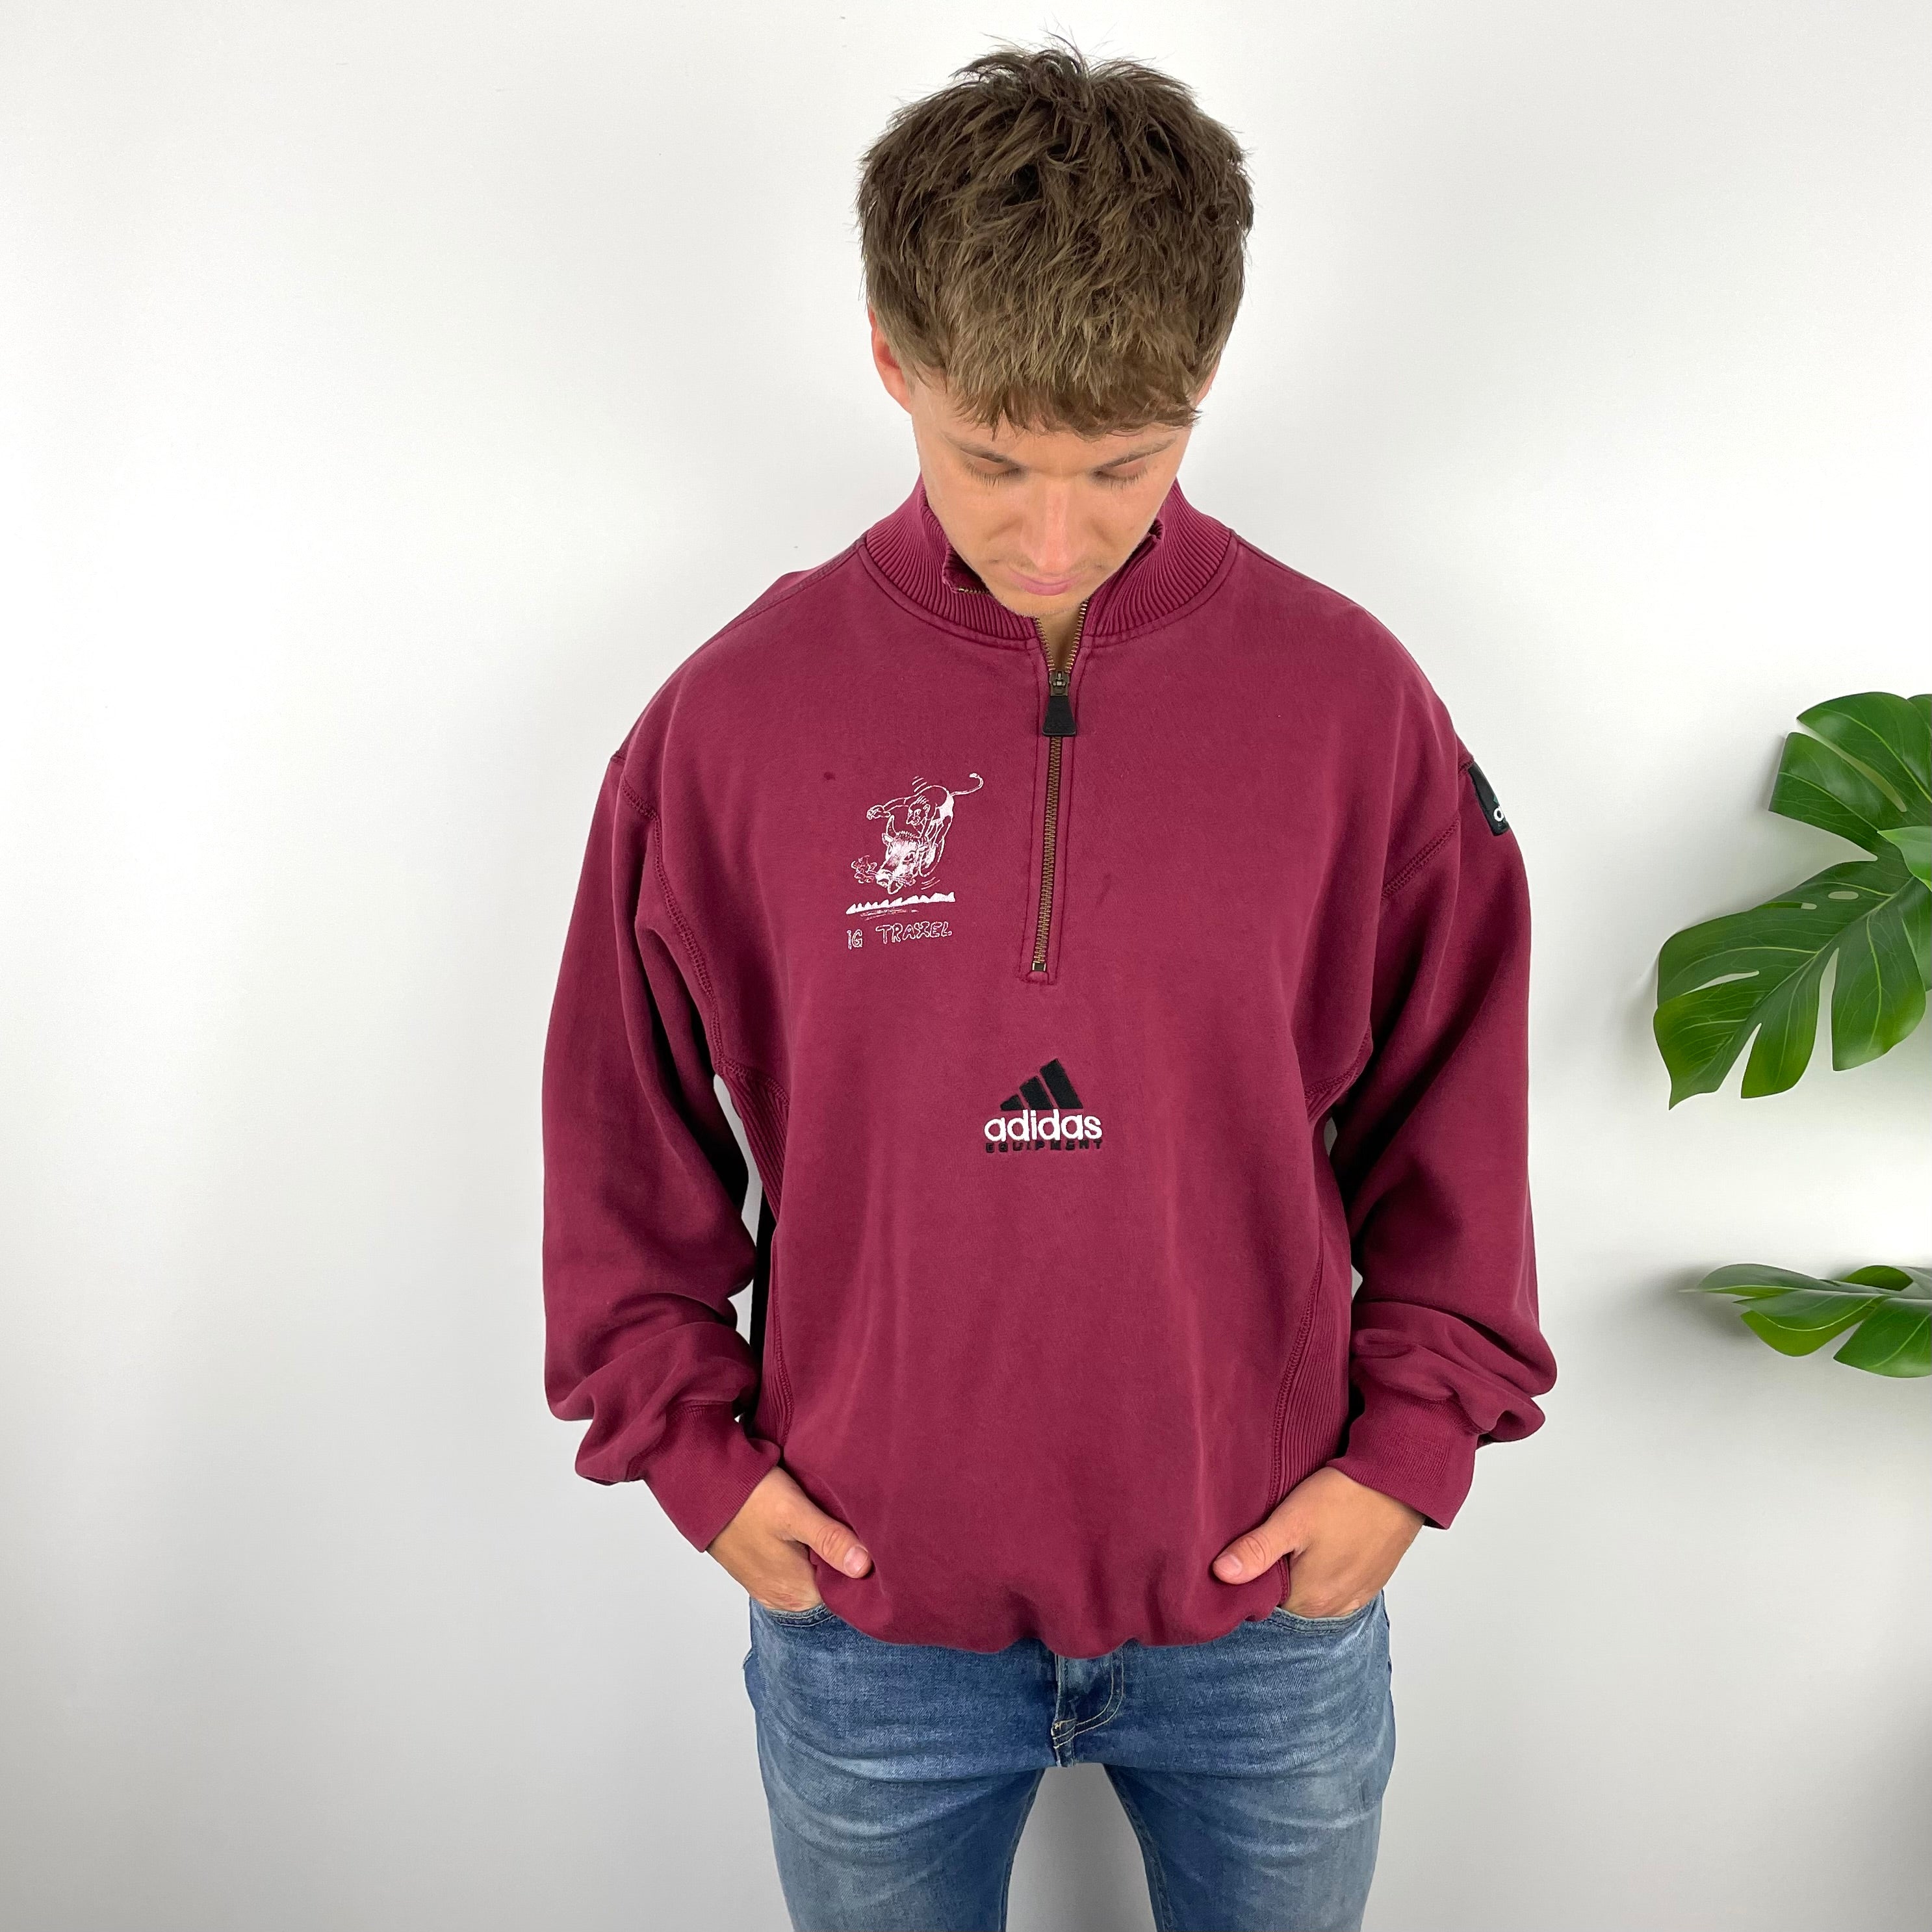 Adidas Equipment RARE Maroon Embroidered Spell Out Quarter Zip Sweatshirt (XL)